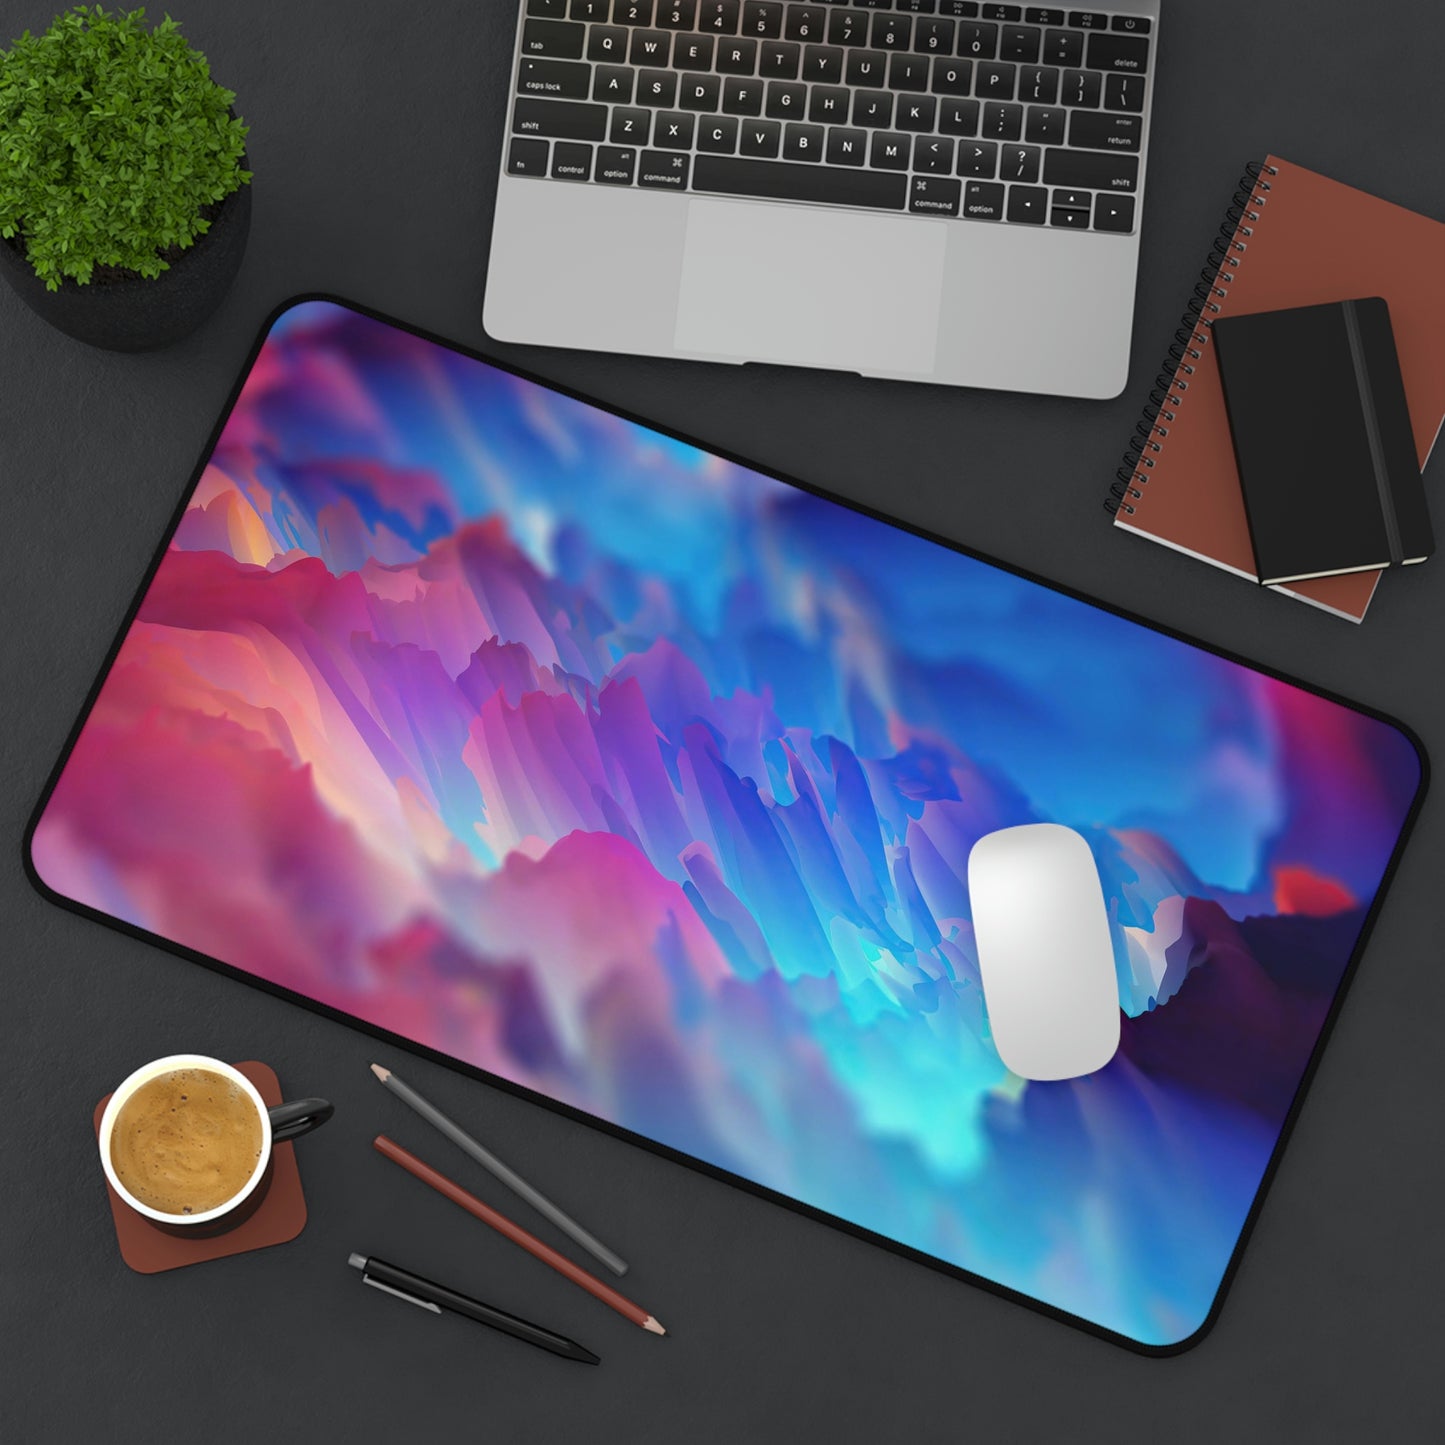 Colorful Abstract Gaming Mouse Pad